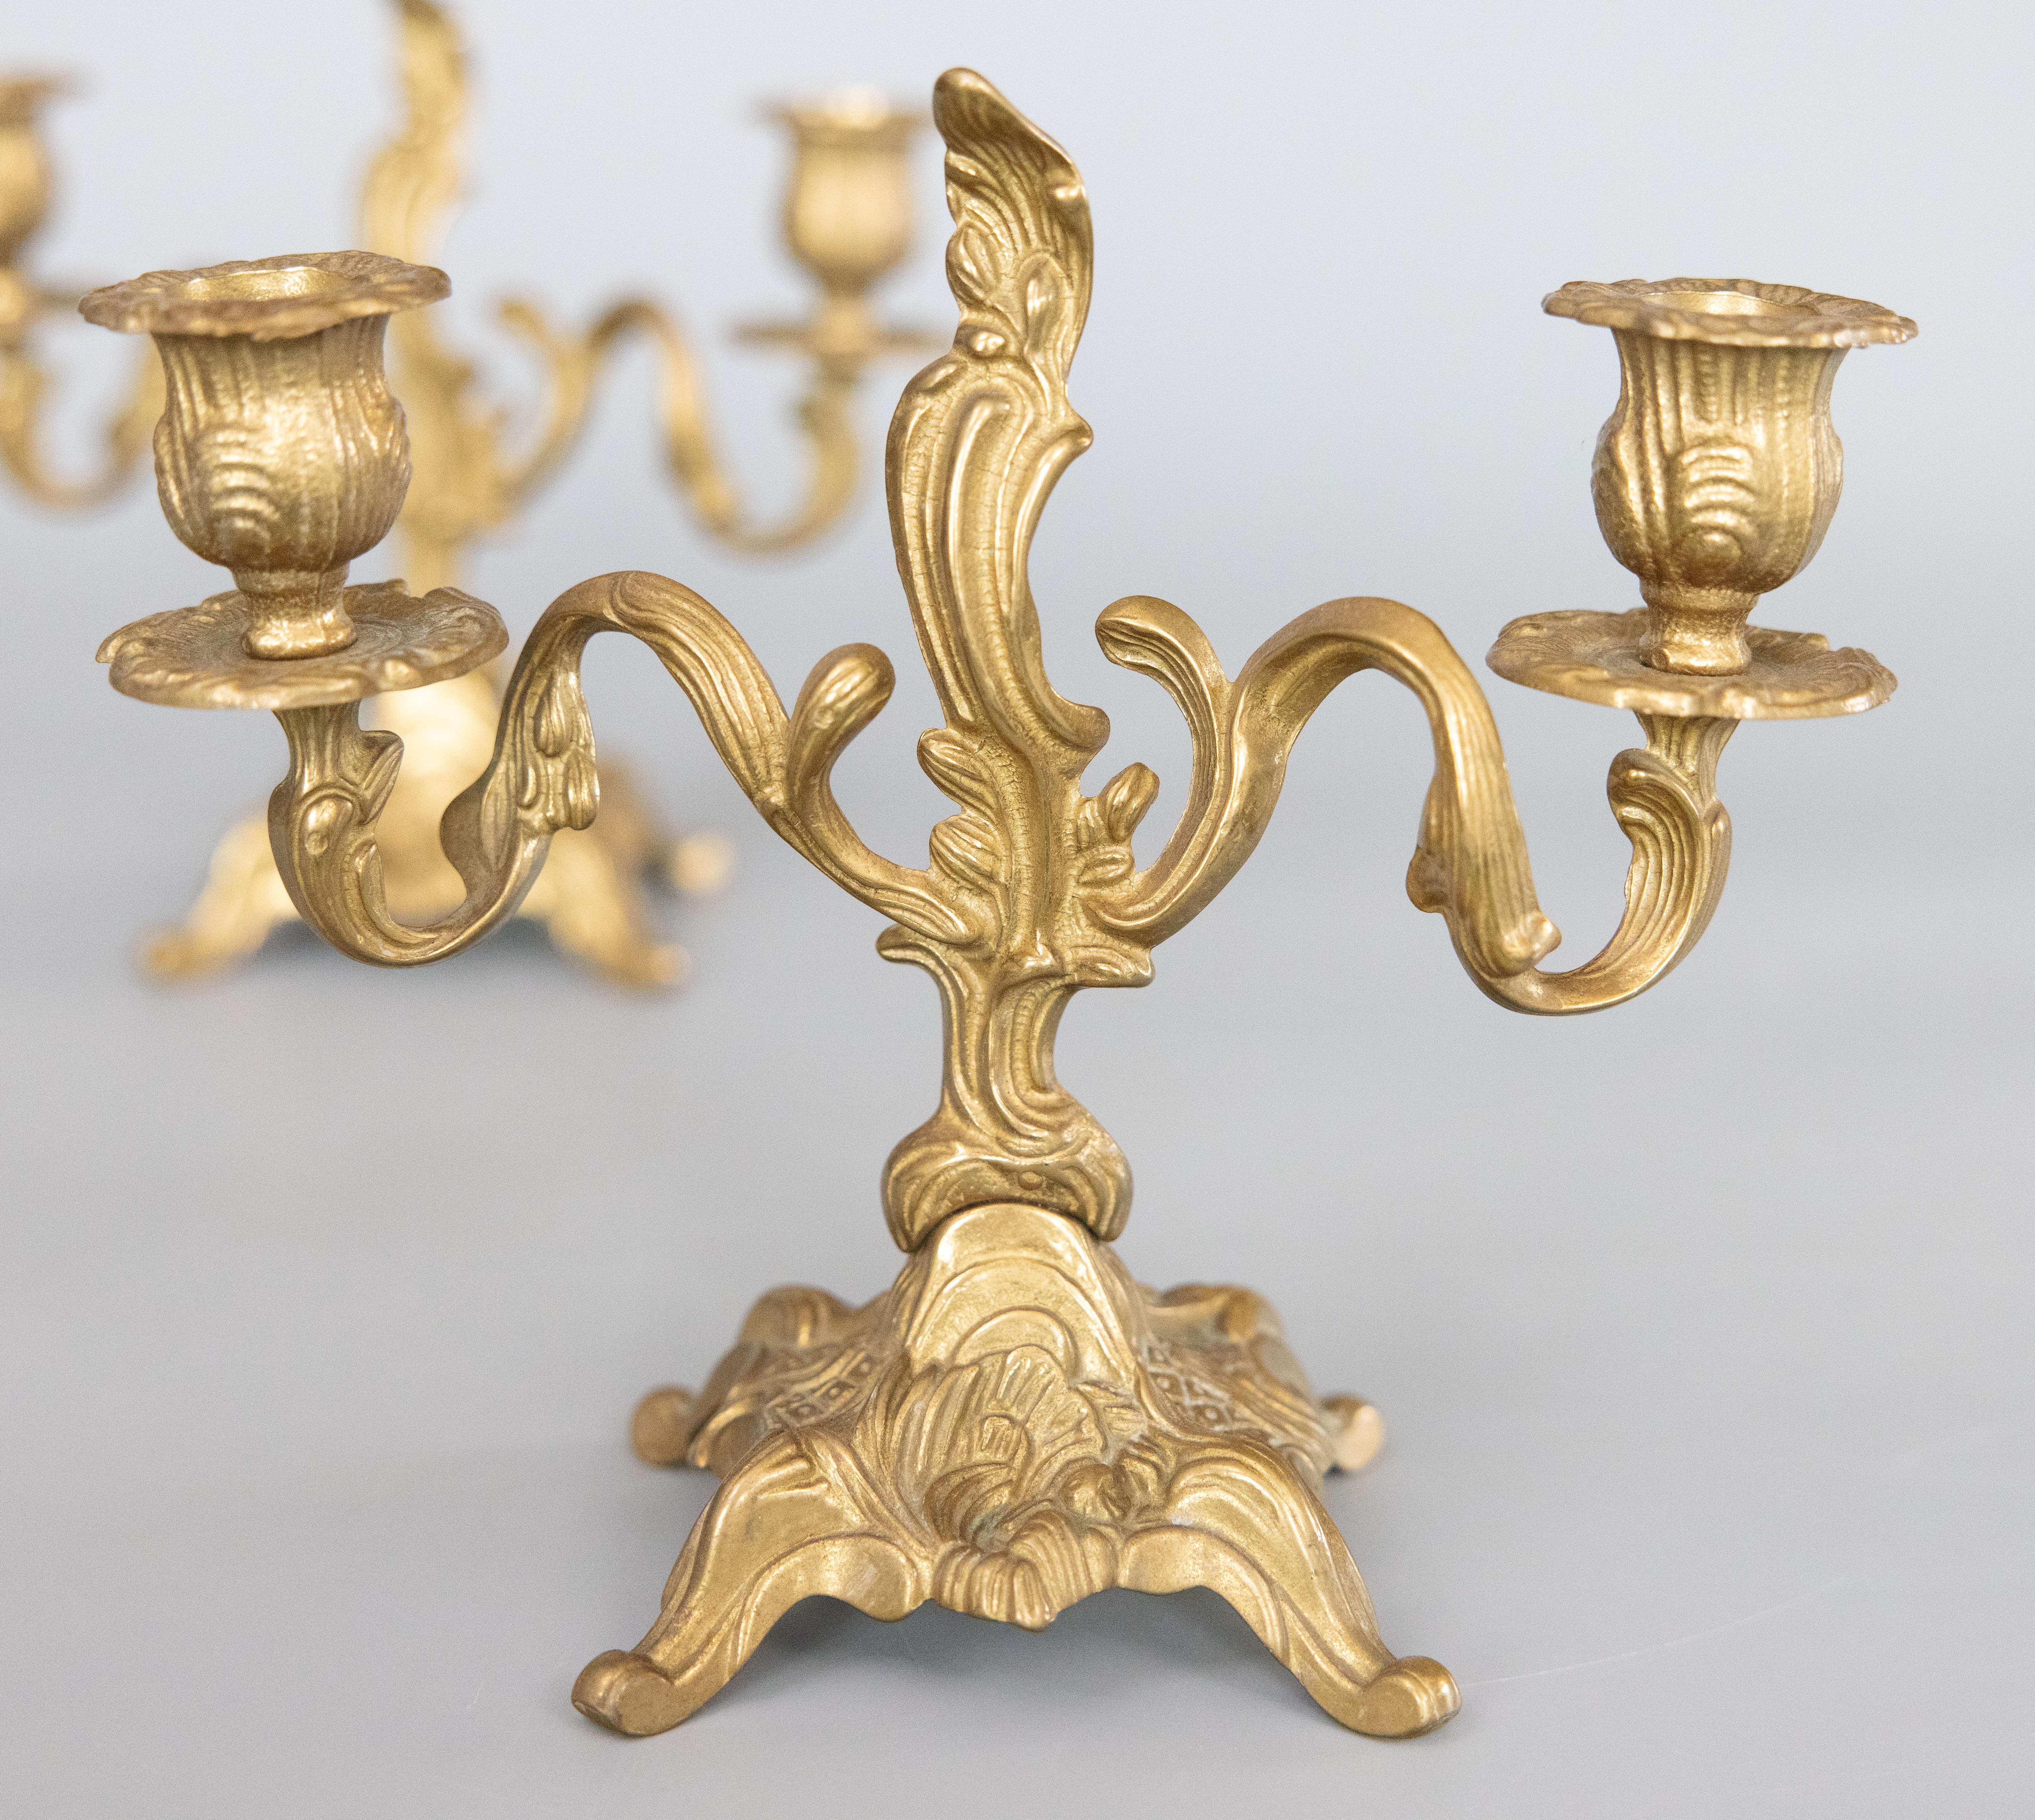 Pair of Italian Rococo Style Gilt Brass Candelabras Candle Holders, circa 1950 In Good Condition For Sale In Pearland, TX